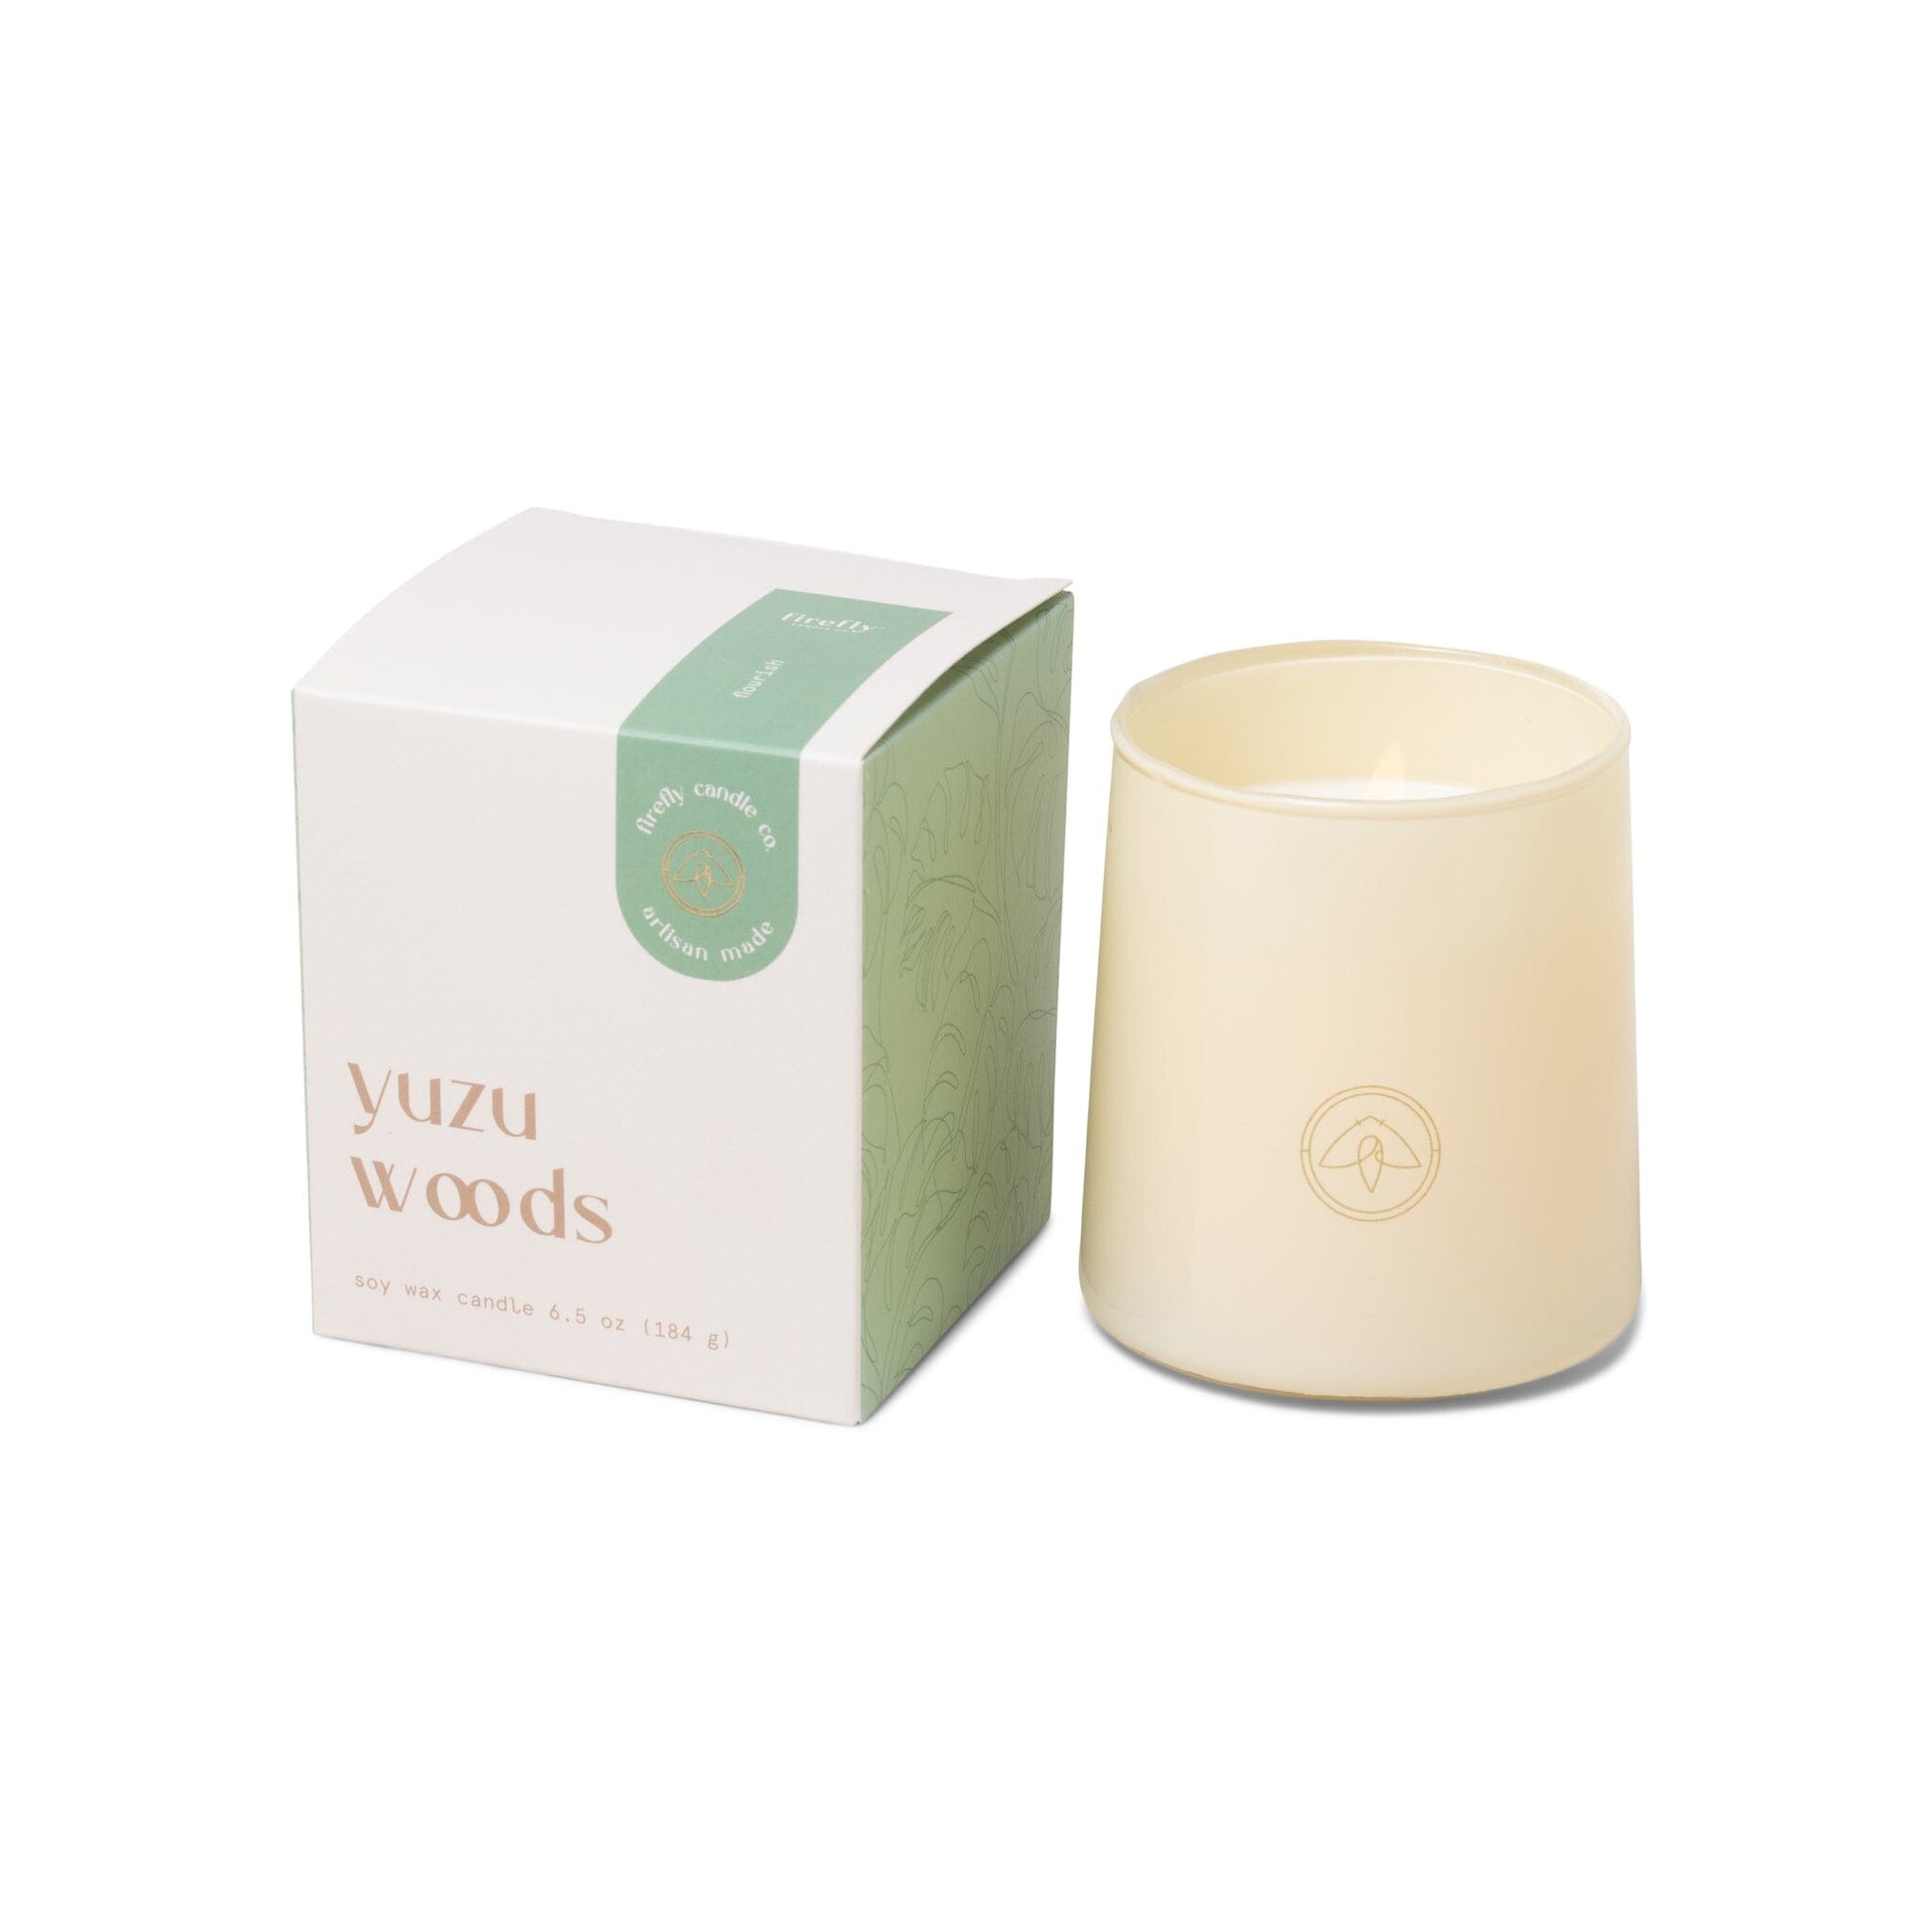 Flourish 6.5 oz Candle - Yuzu Woods box and candle side by side